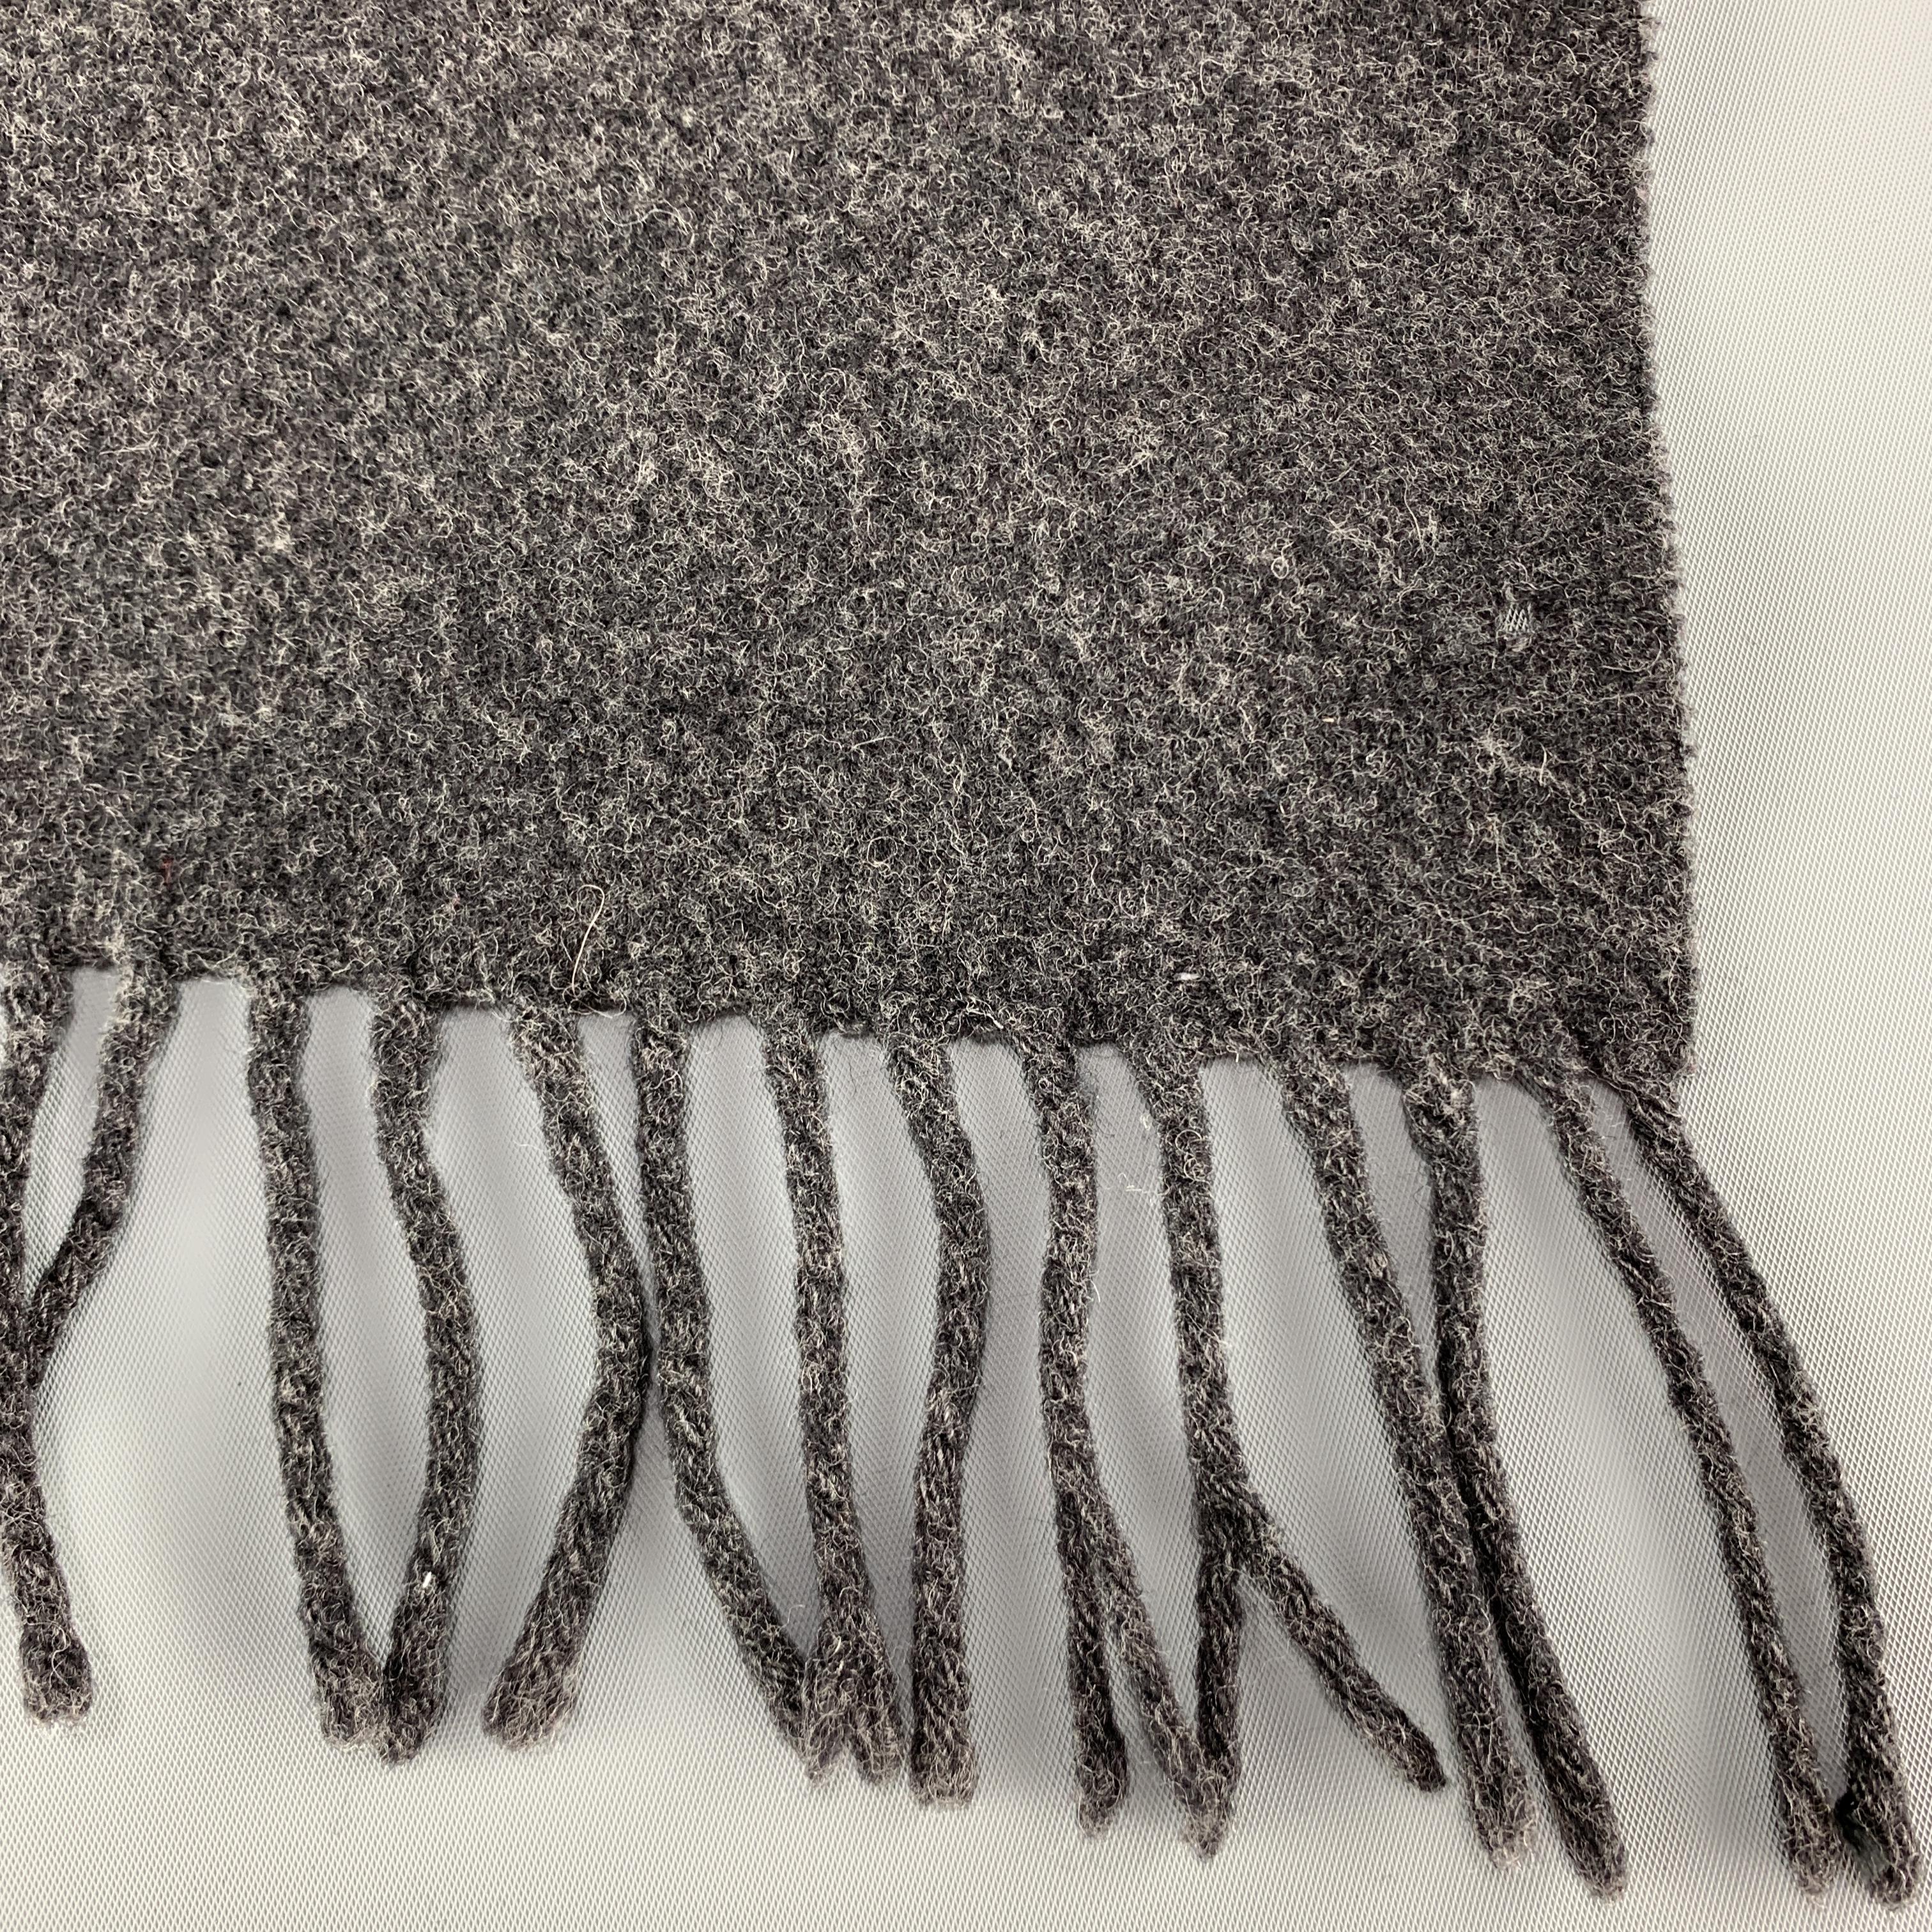 DOLCE & GABBANA scarf comes in heathered charcoal gray wool felt with fringe trim. Made in Italy.

Very Good Pre-Owned Condition.
58 x 12 in.